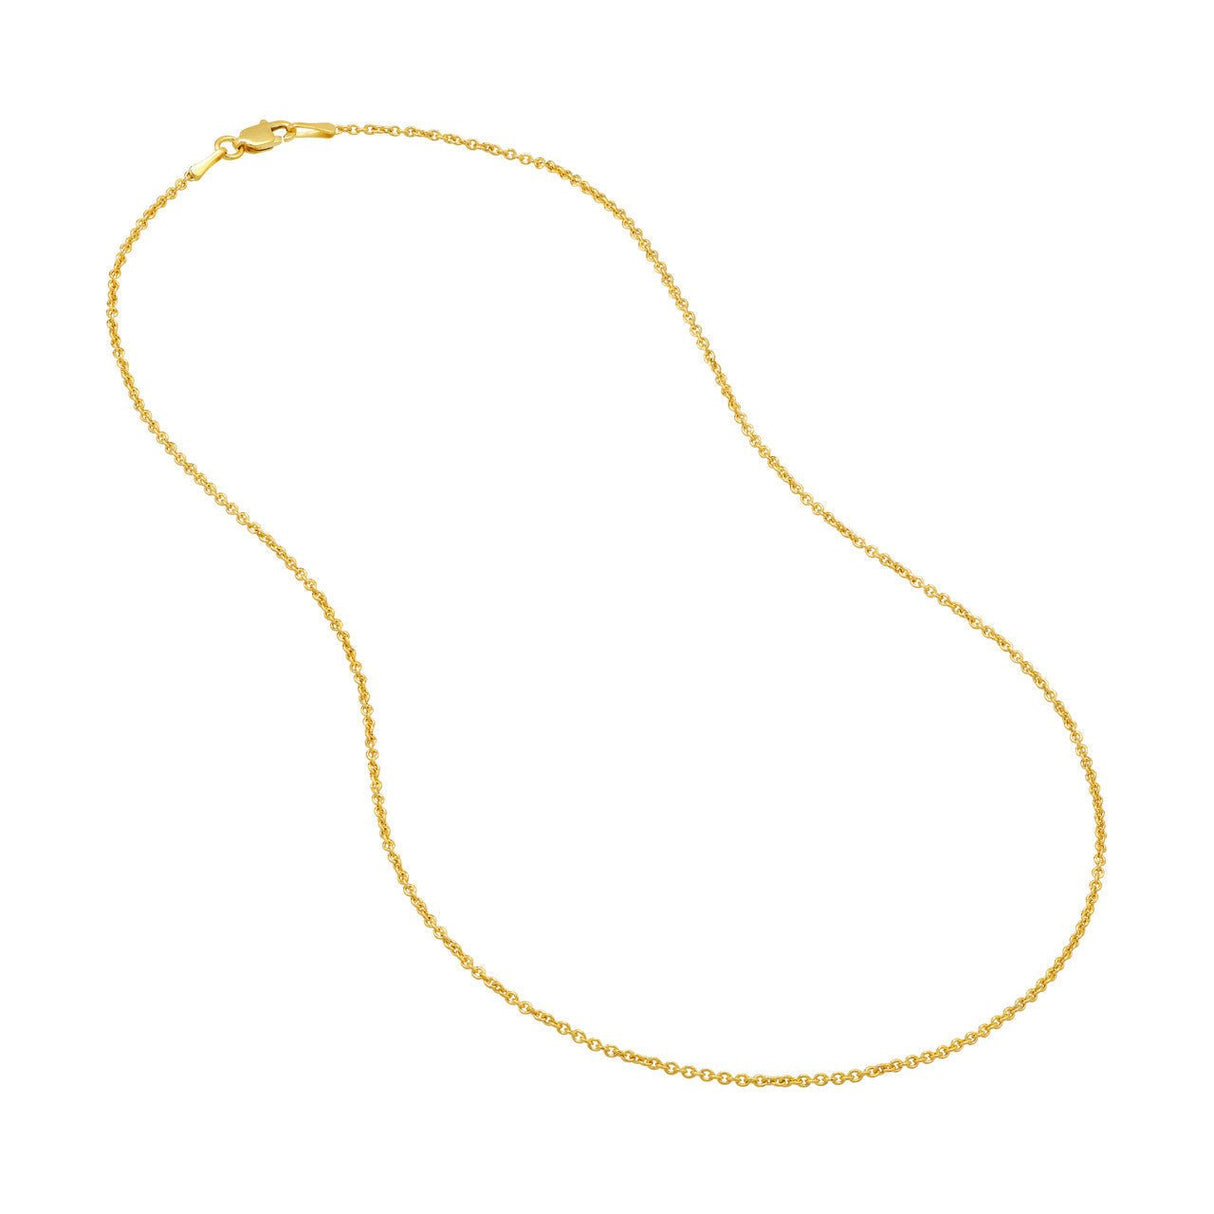 14K Gold Chain, 18", 1.45mm Light Cable Chain with Lobster Lock, Gold Layered Chain, Gold Necklaces, - Diamond Origin